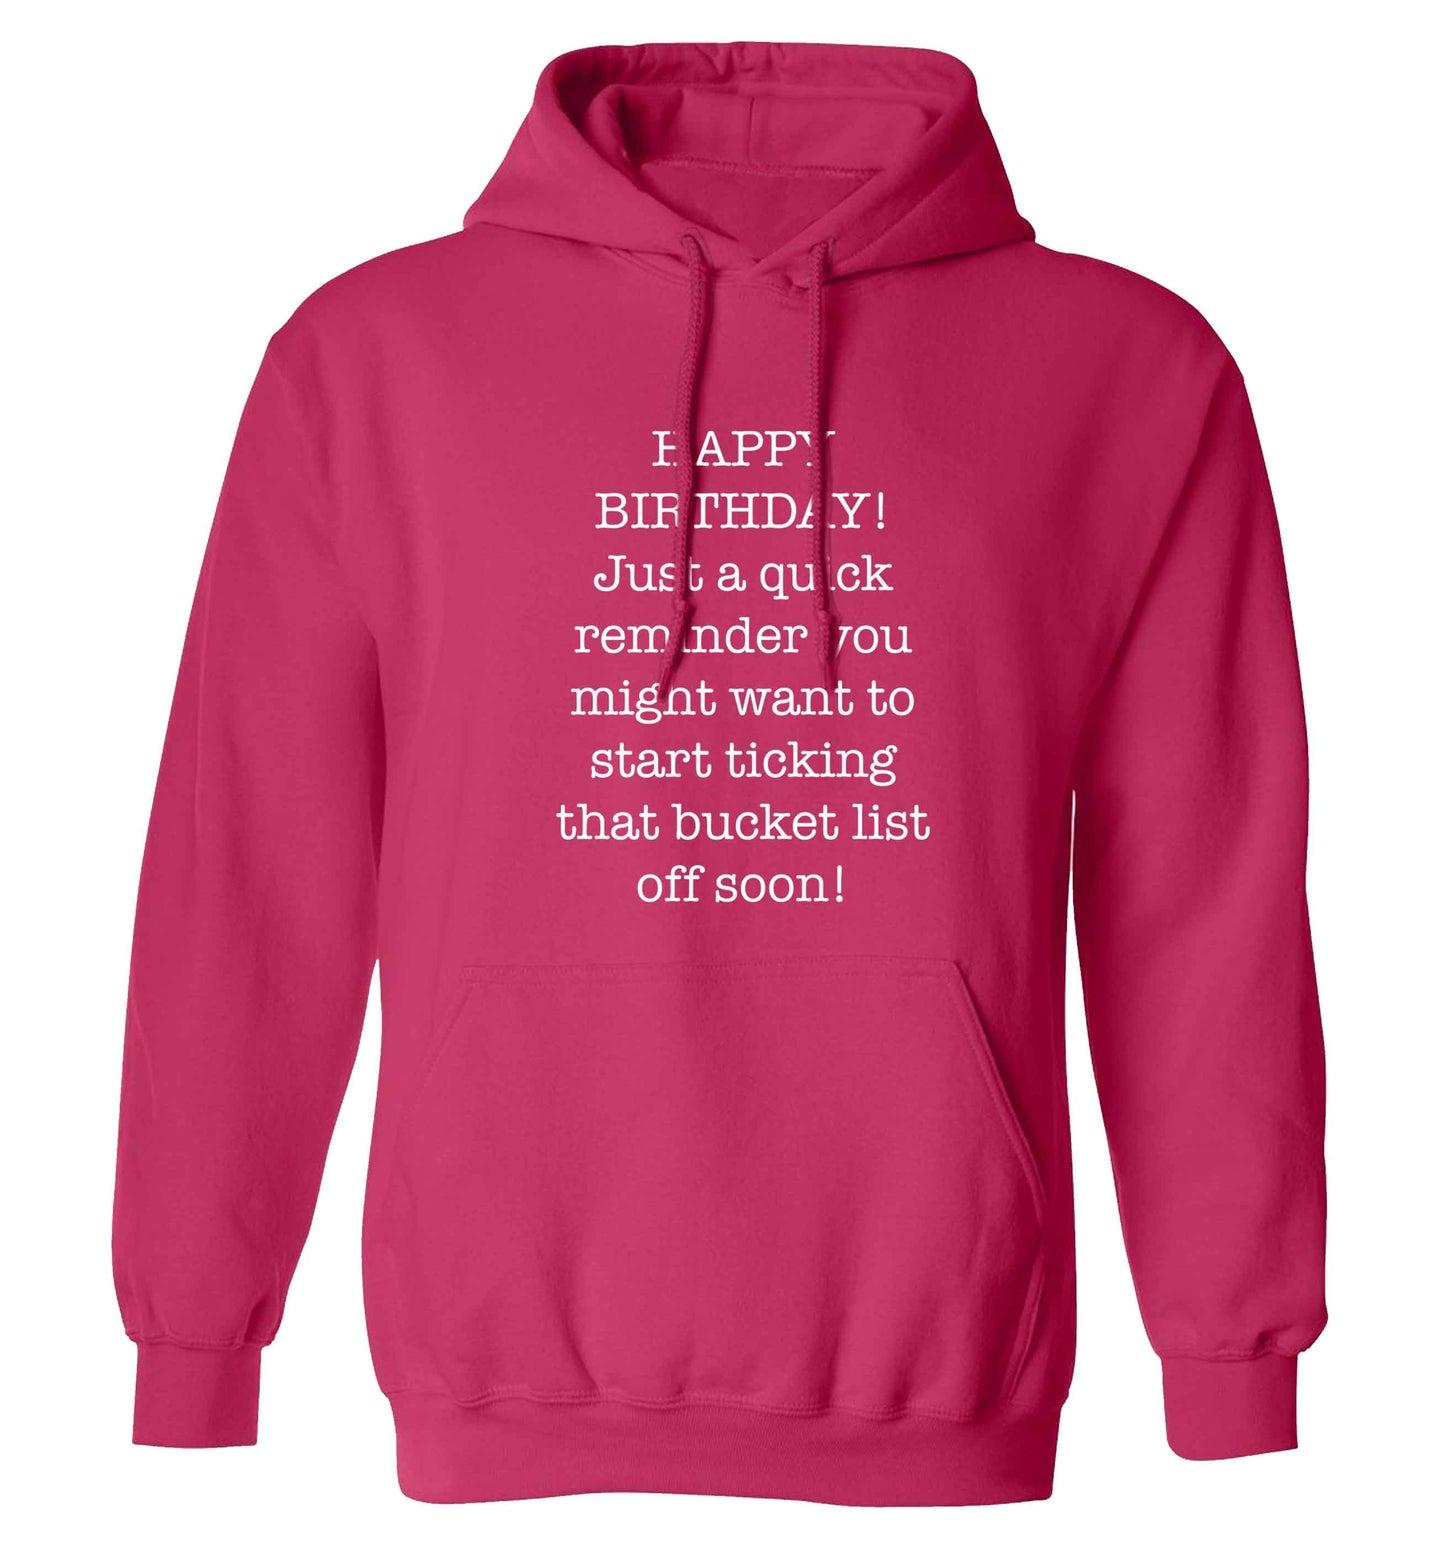 Happy birthday, just a quick reminder you might want to start ticking that bucket list off soon adults unisex pink hoodie 2XL